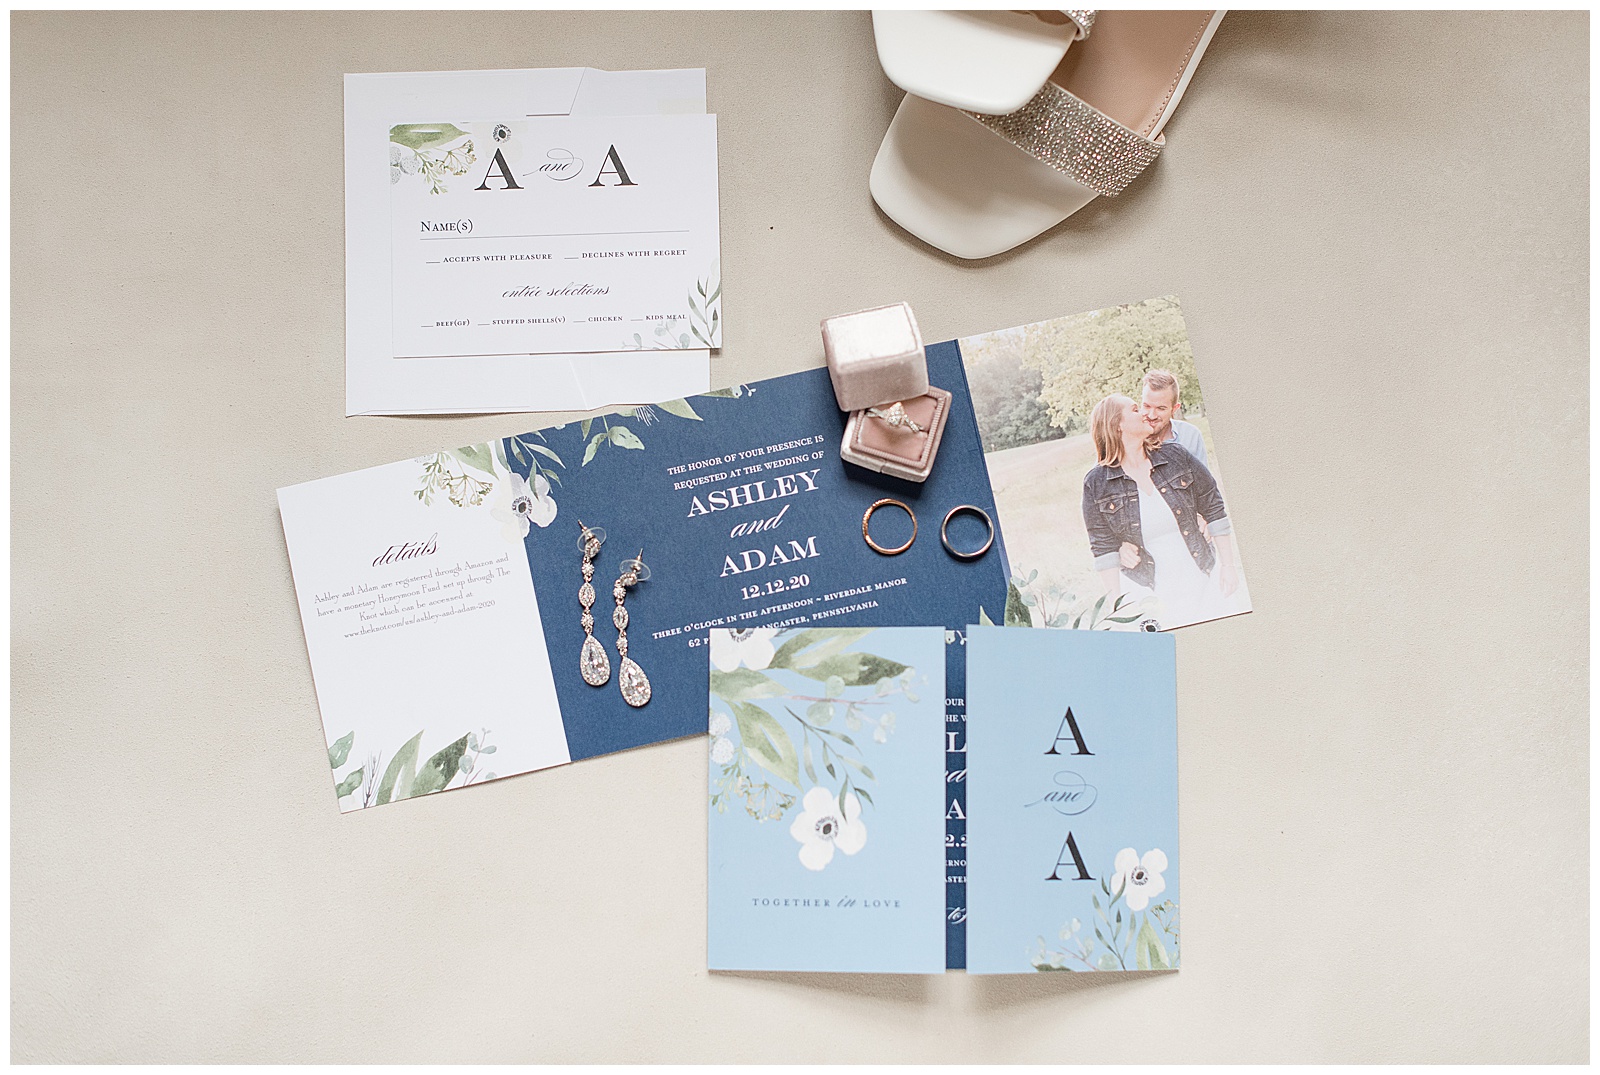 shades of blue wedding invitations and bride and groom rings and brides accessories